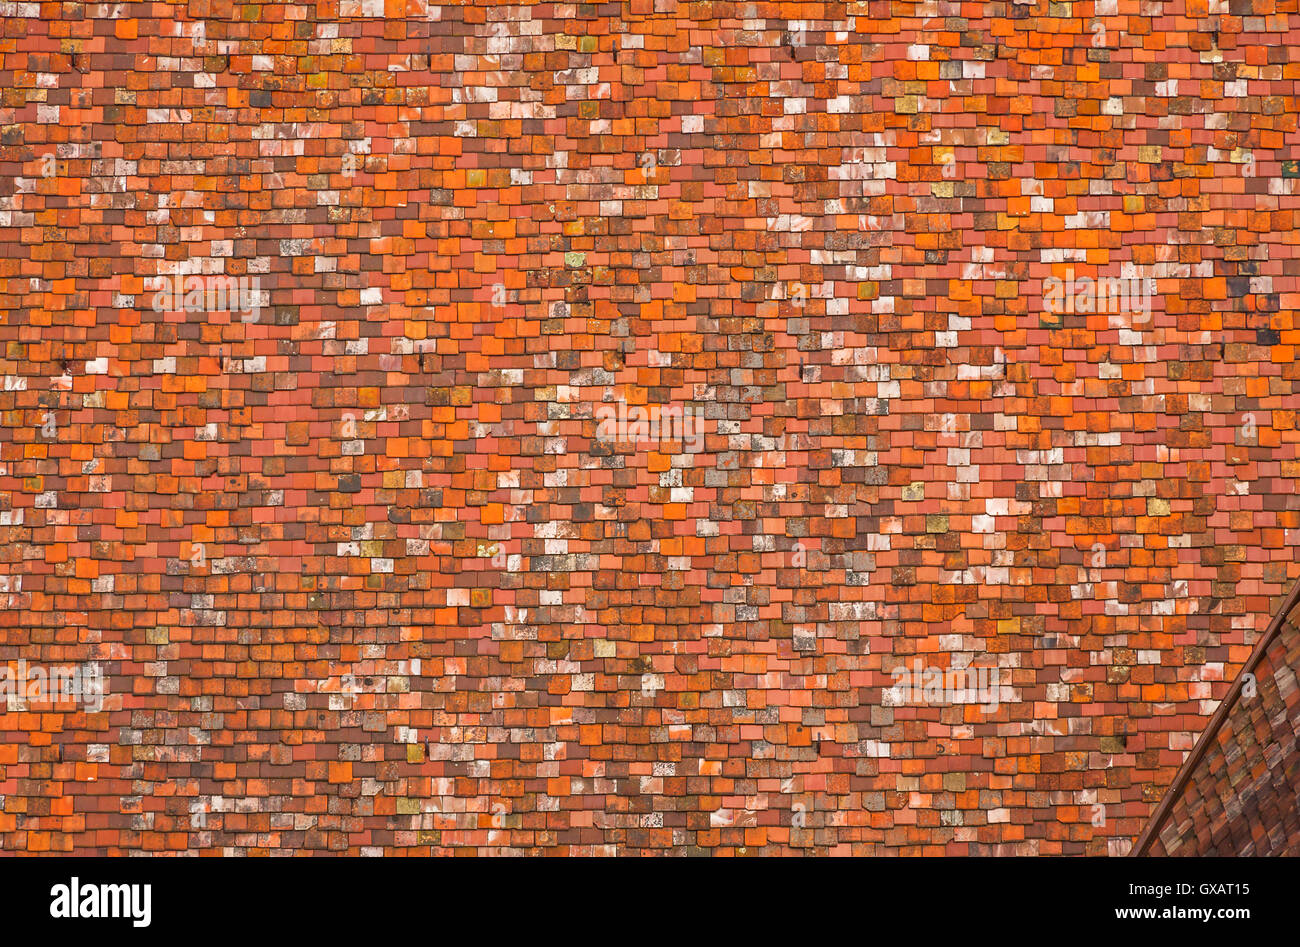 Bright background made of red roof tiles of an old gothic-style building Stock Photo